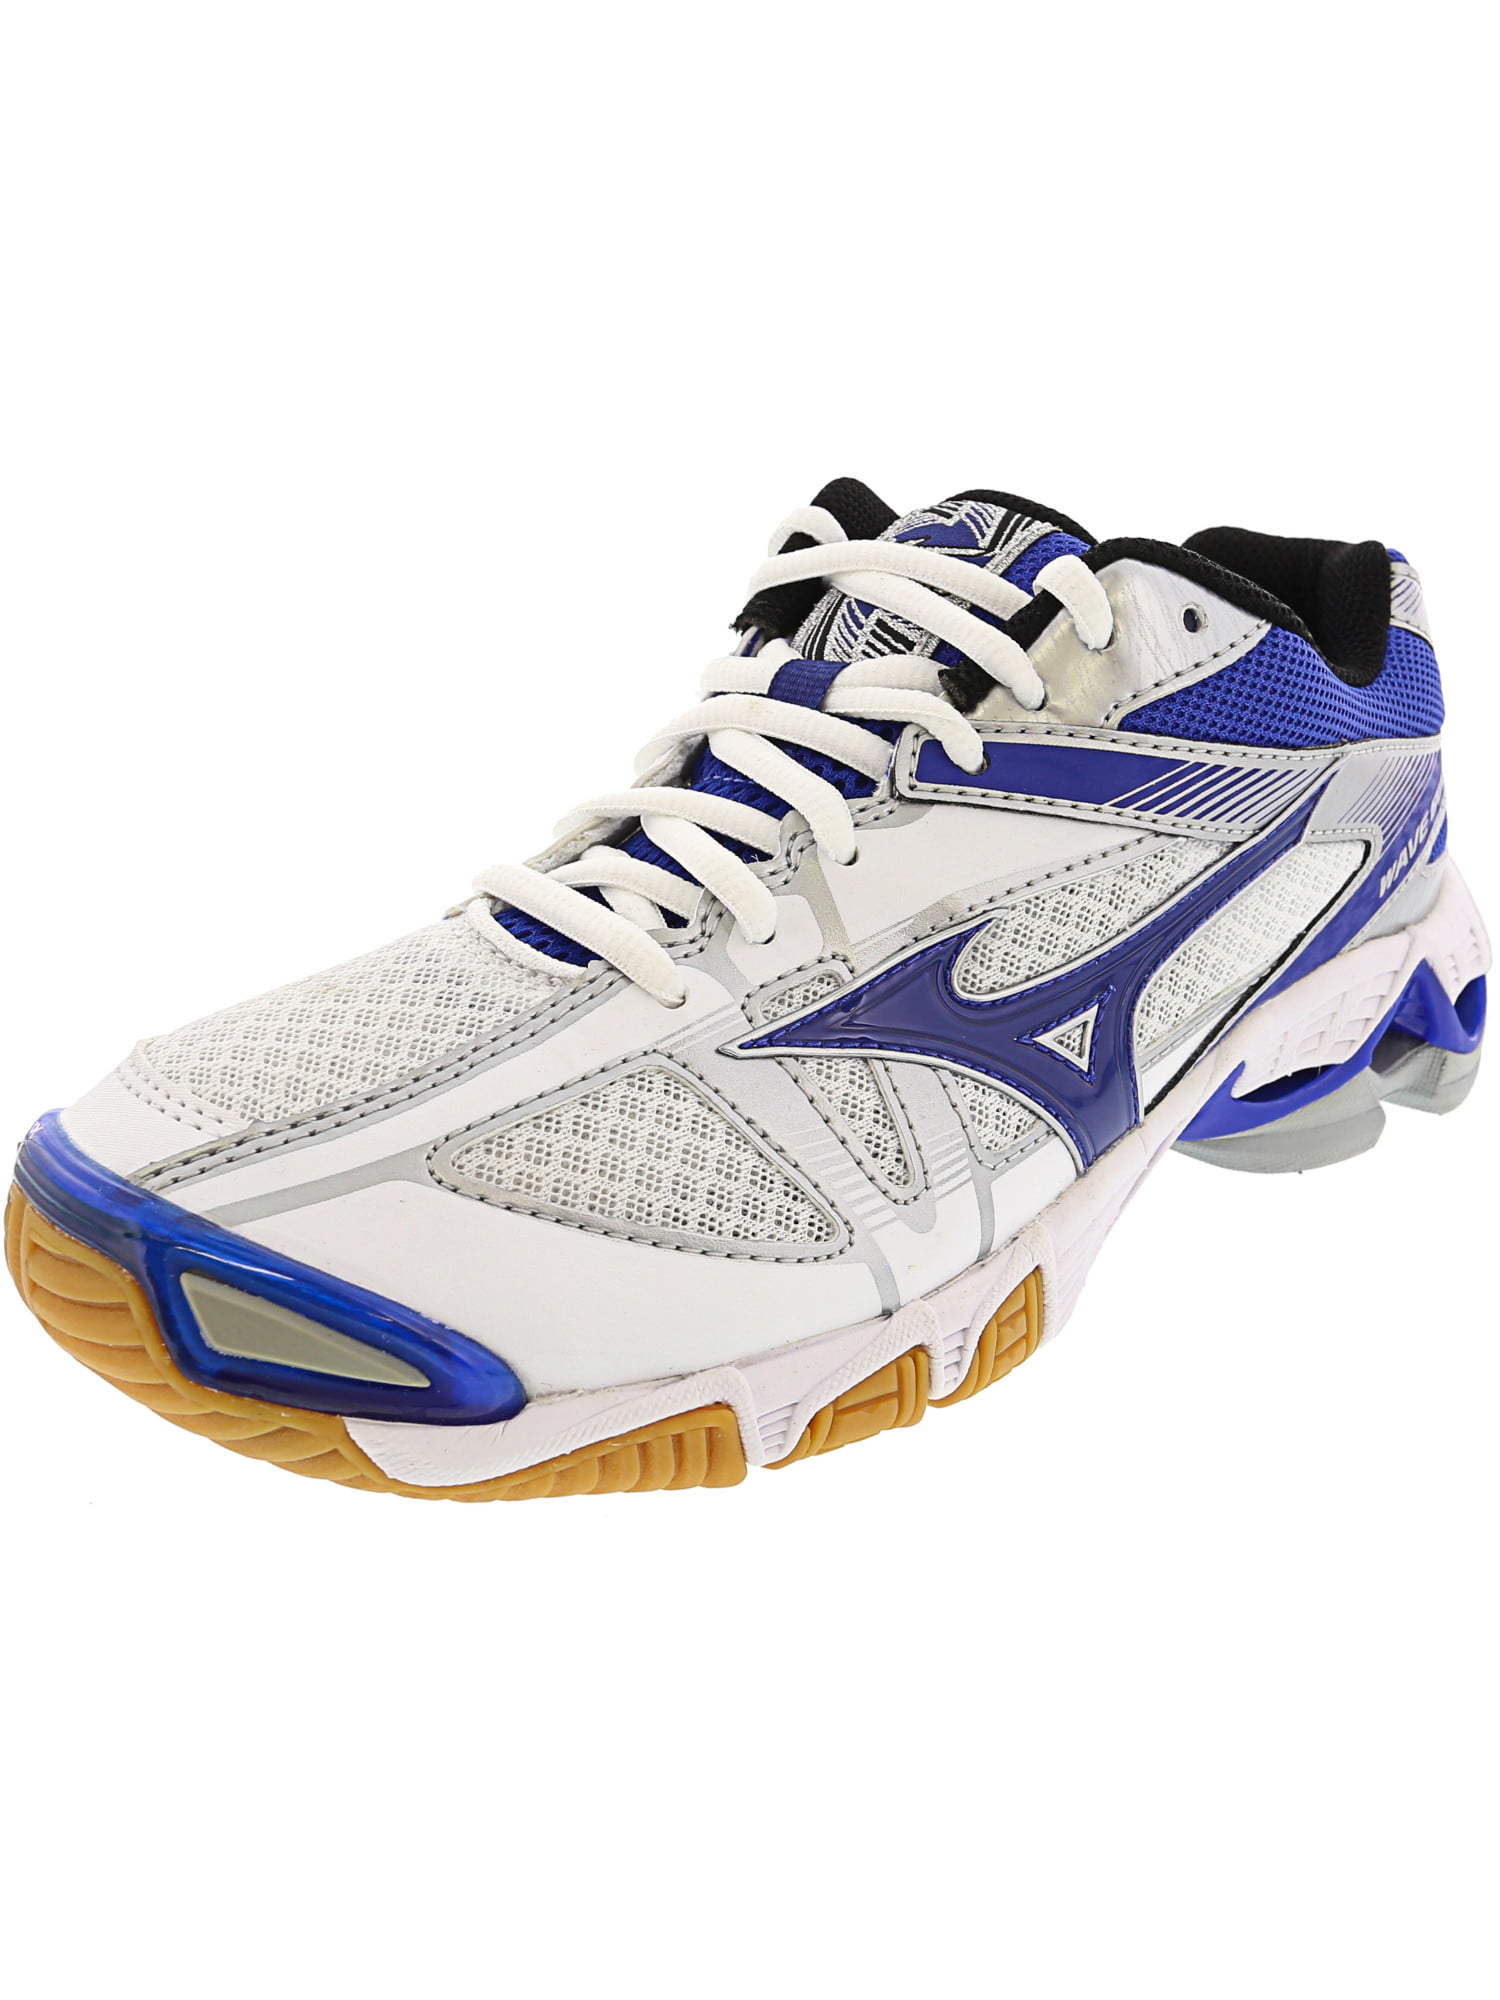 wave bolt 6 volleyball shoes